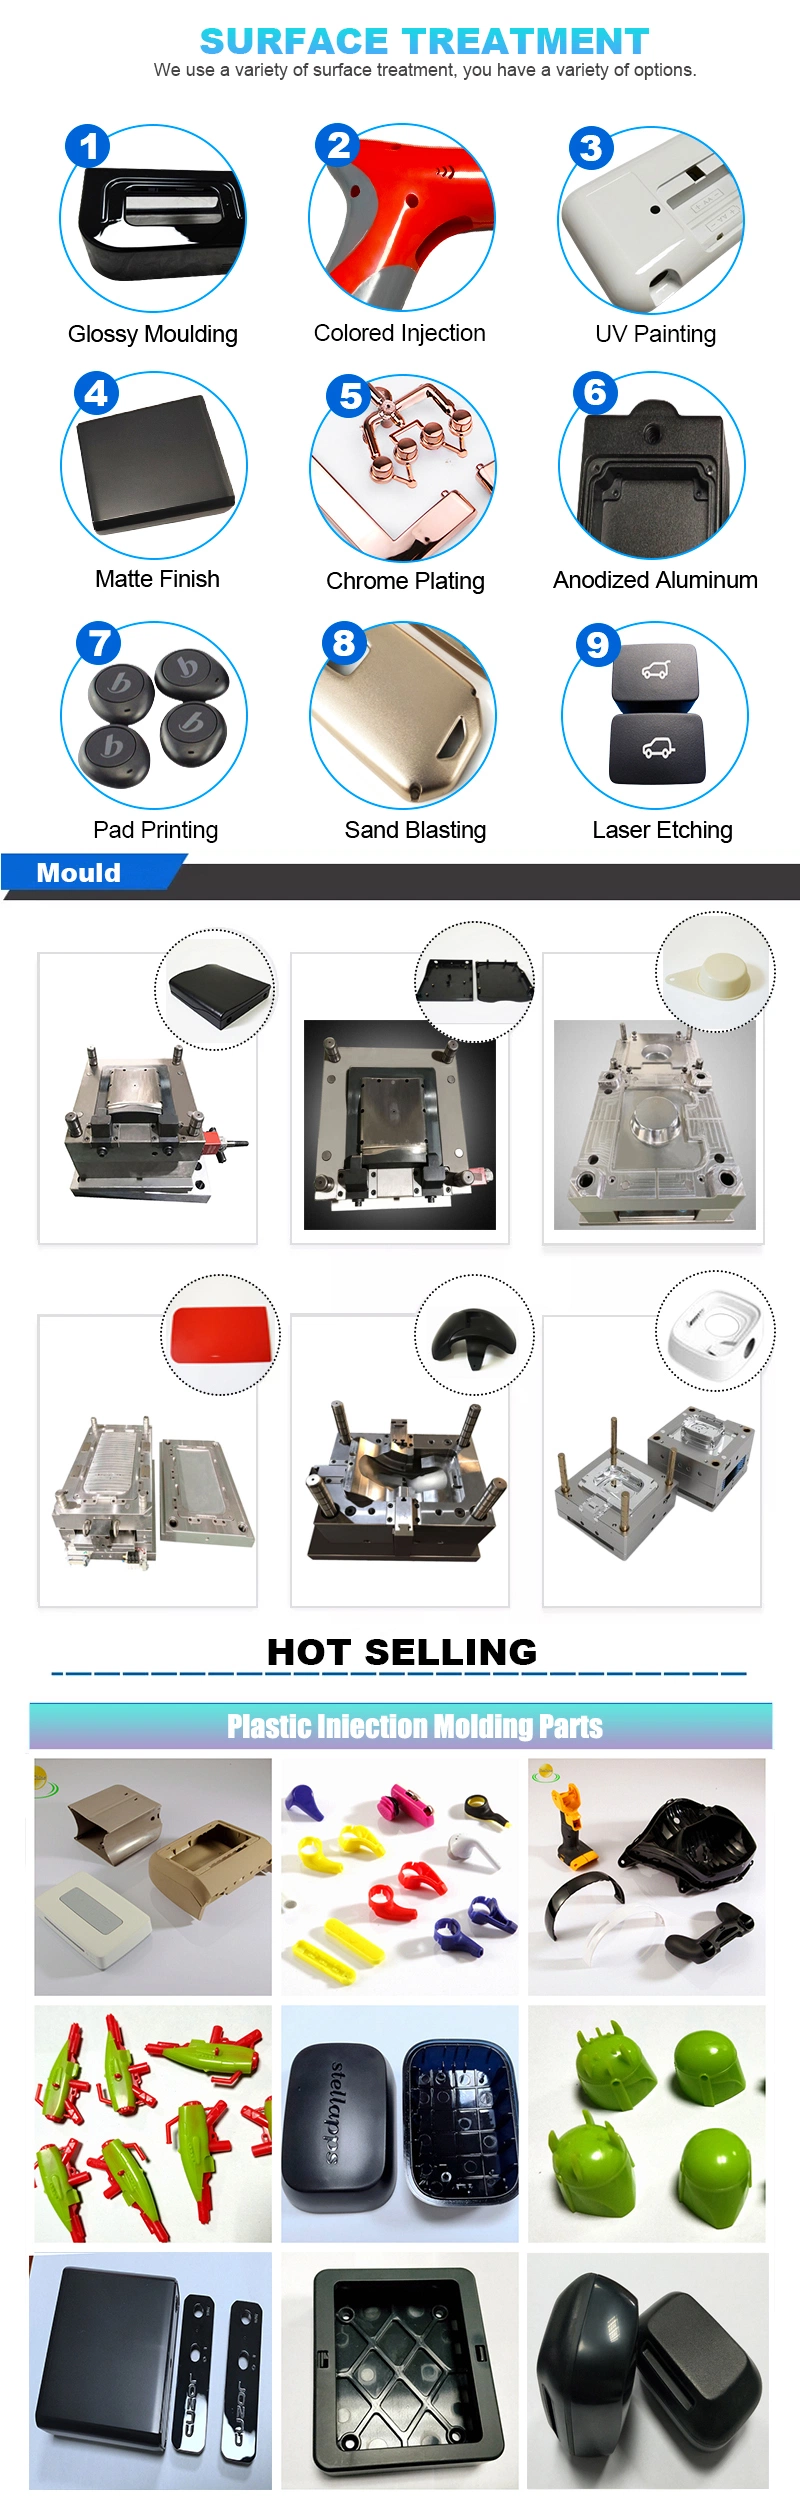 Factory ABS/PA/PP/PC Materials High Quality Plastic Injection Molding for Medical/Industrial Plastic Parts